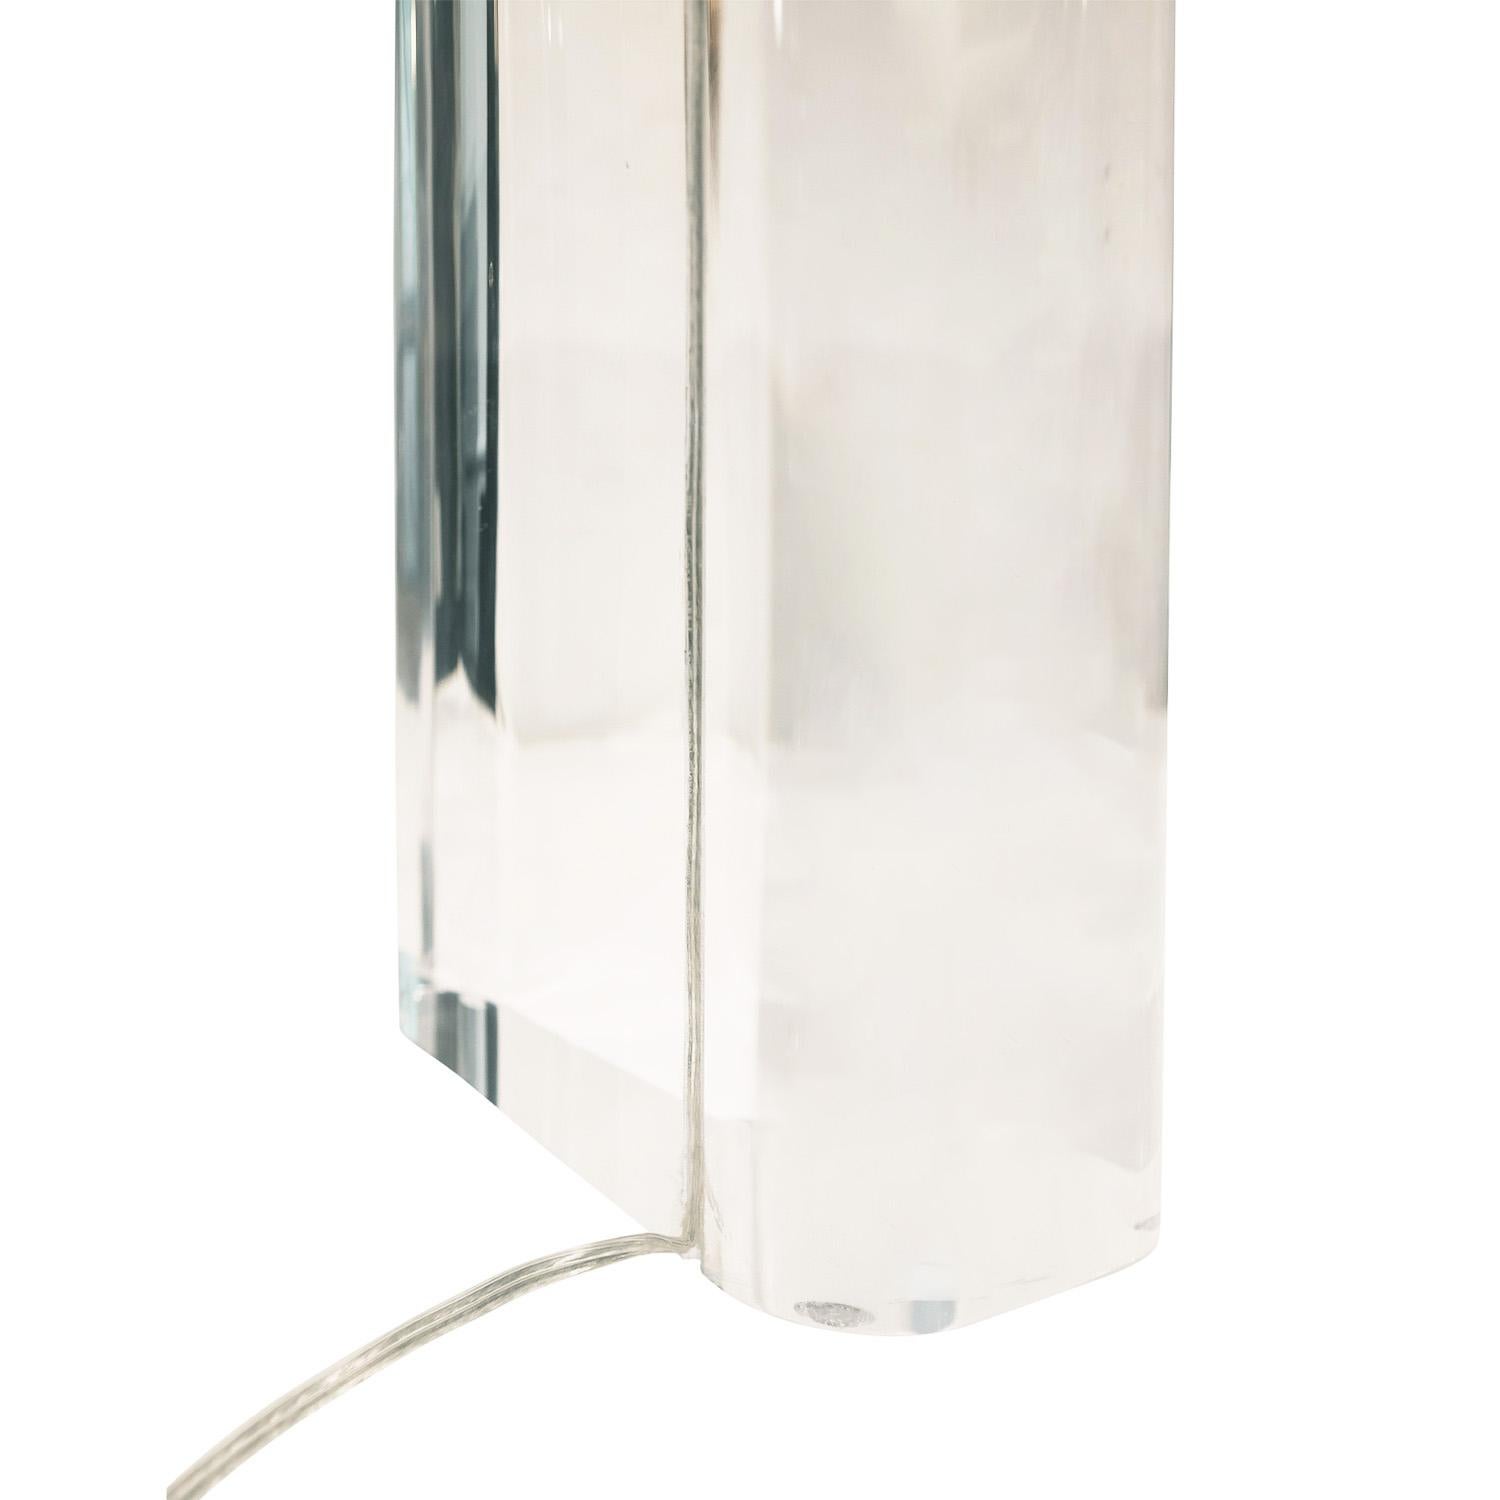 Late 20th Century Artisan Pair of Large Lucite Block Table Lamps 1970s